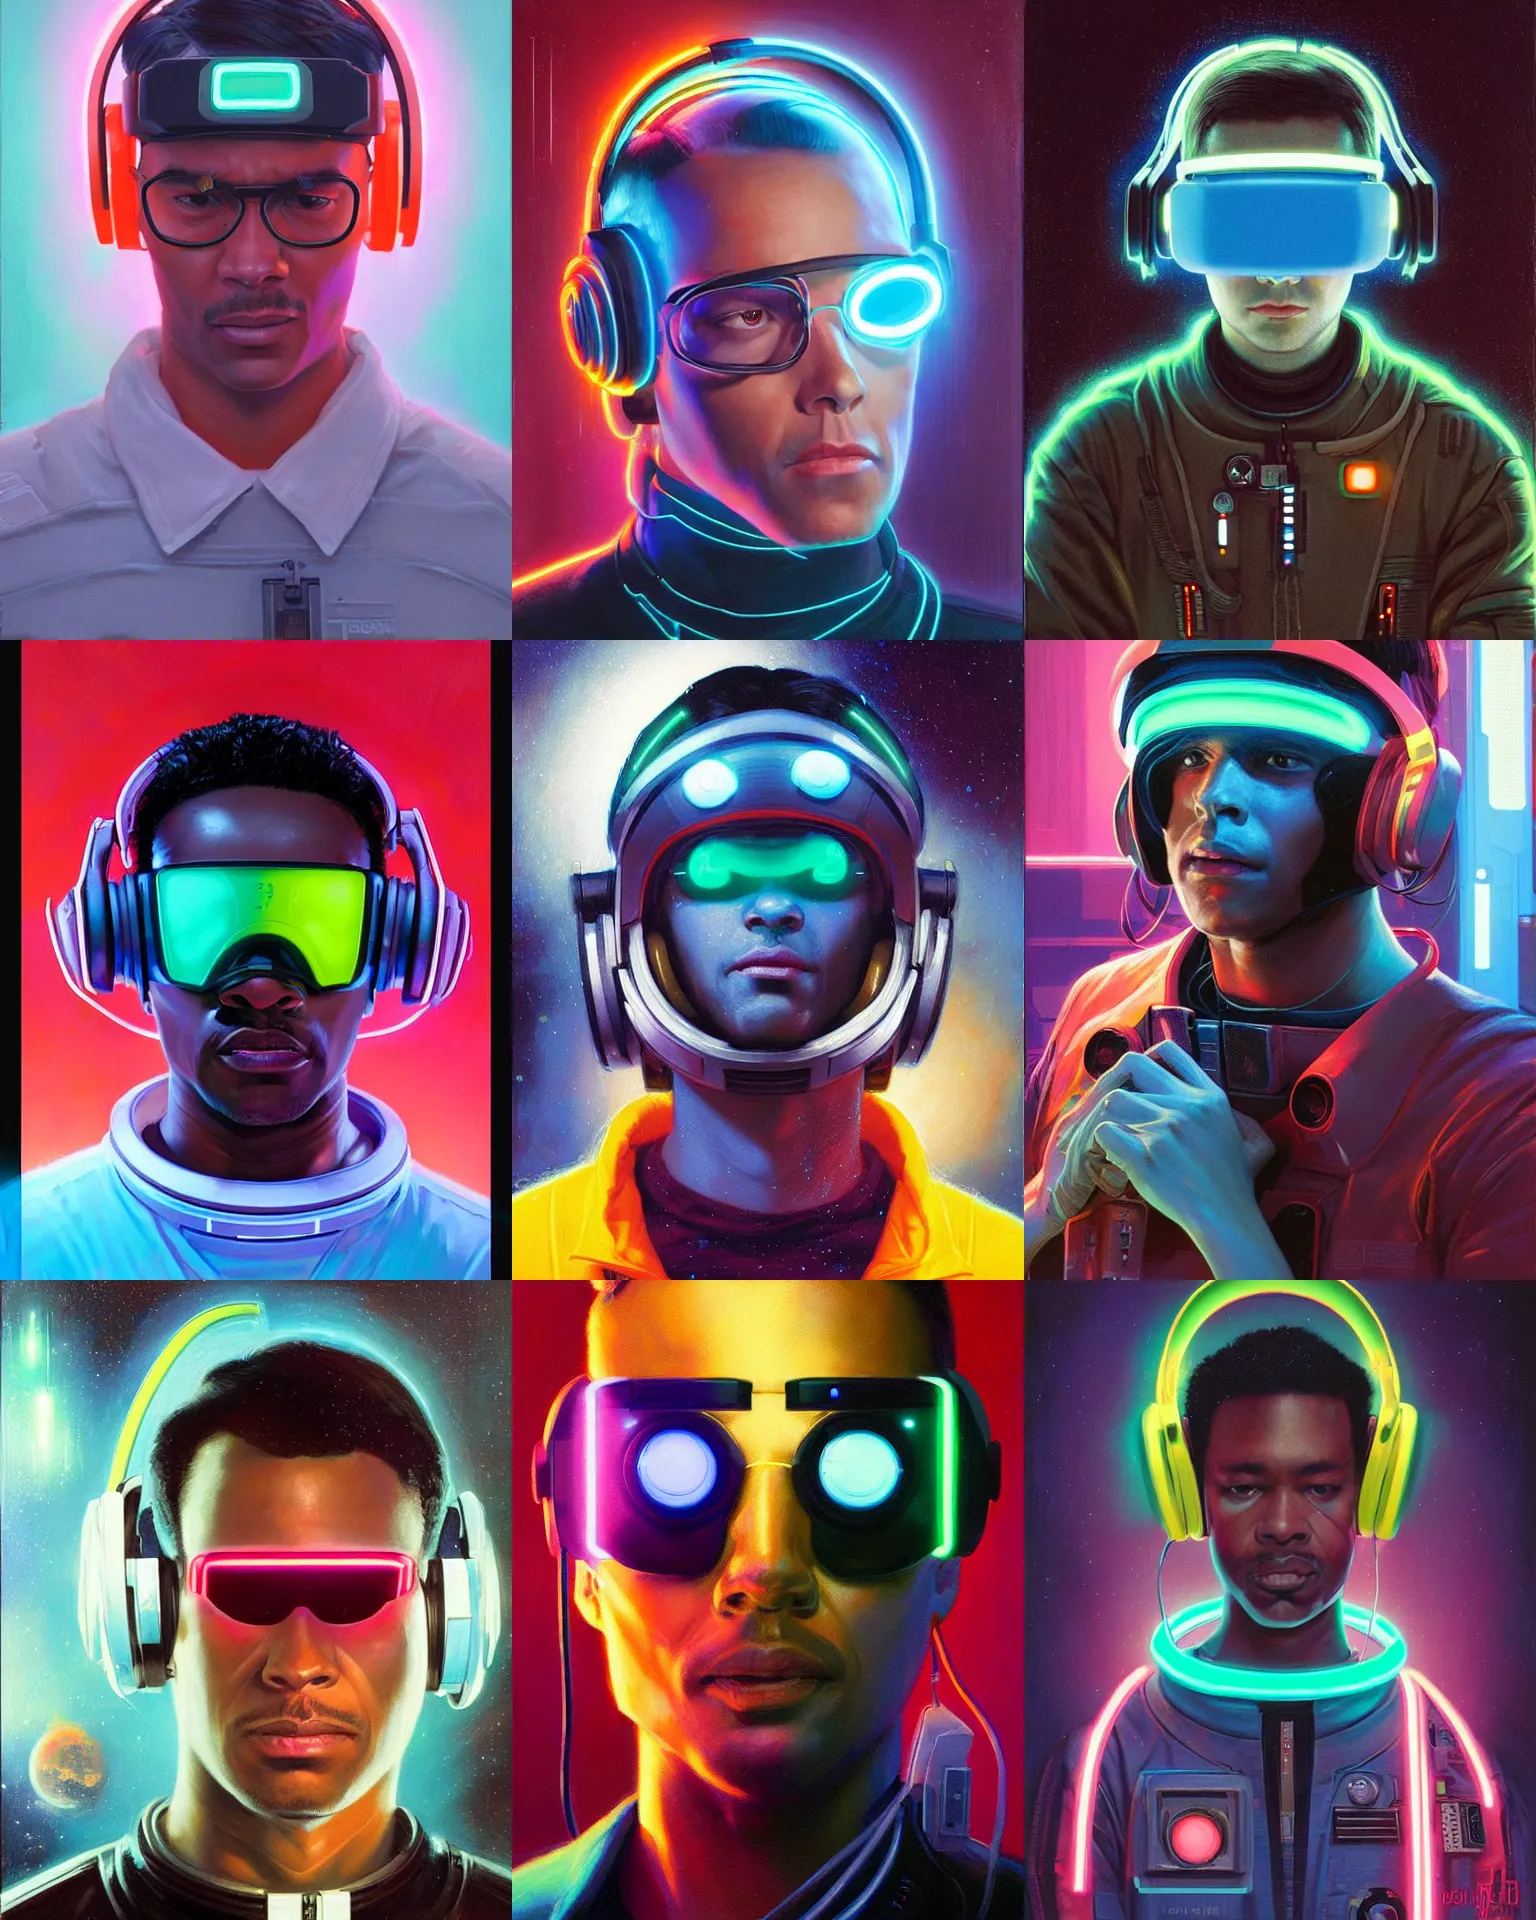 Prompt: neon cyberpunk programmer with glowing geordi visor over eyes and sleek headphones headshot muted colors portrait painting by donato giancola, dean cornwall, rhads, tom whalen, conrad roset astronaut fashion photography